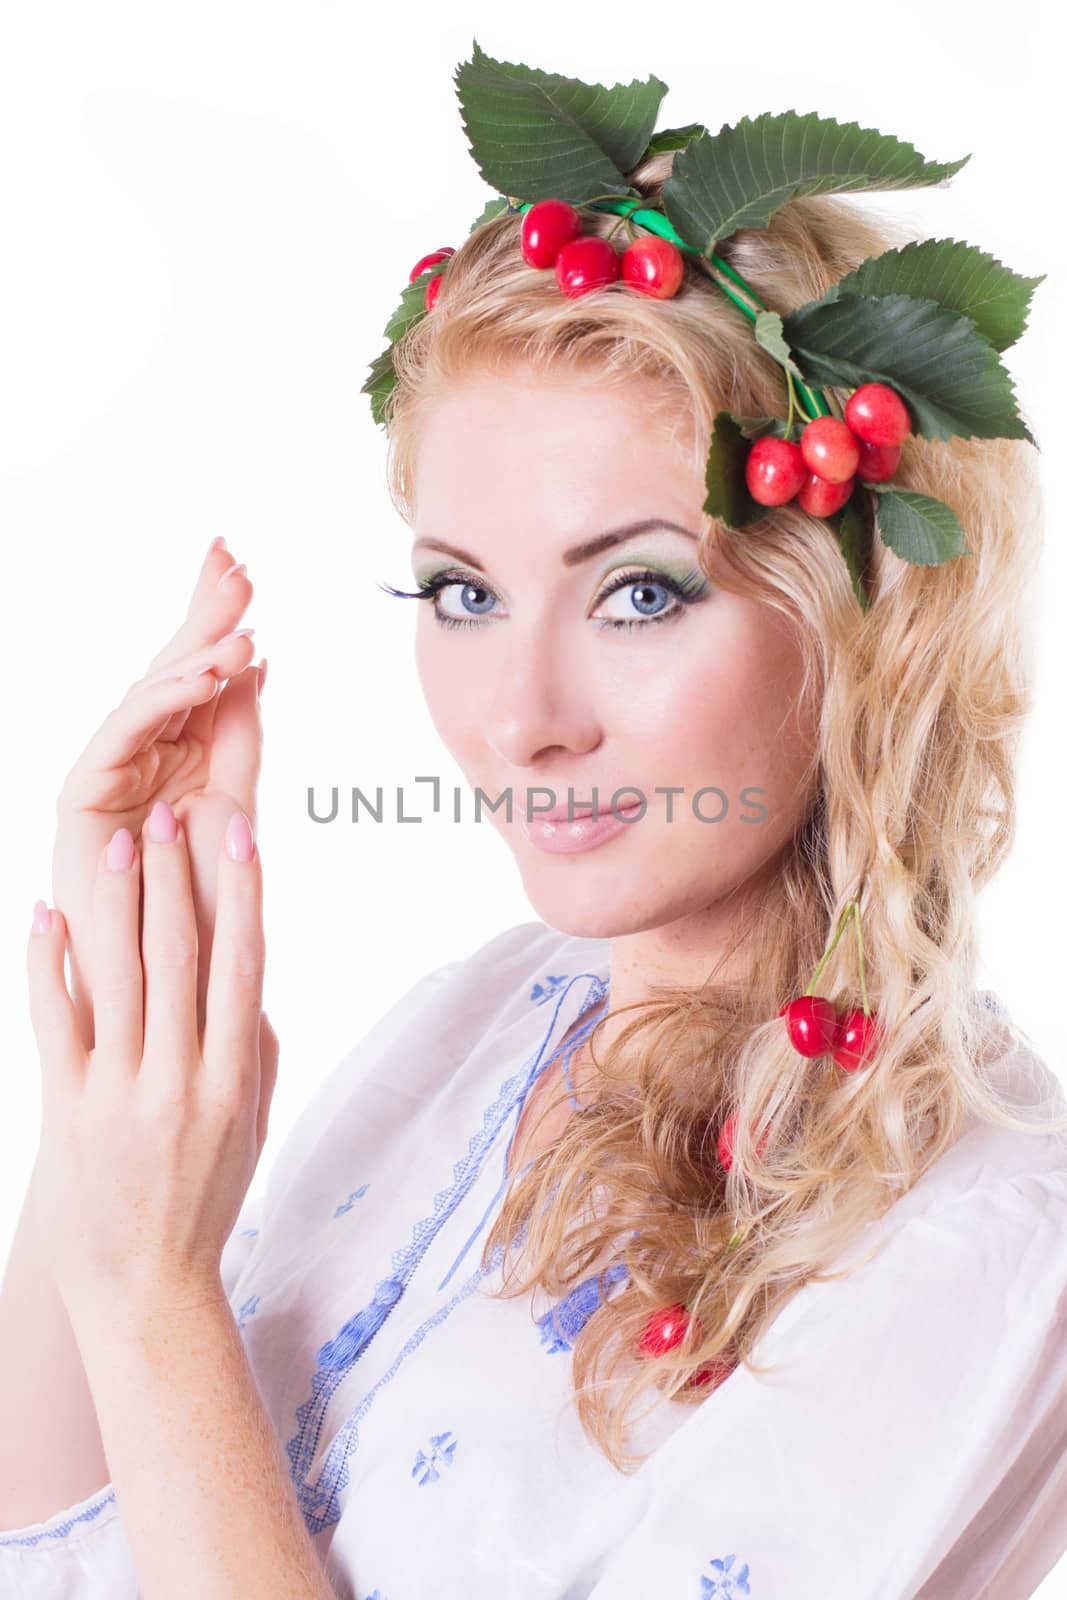 Russian sensual woman with wreath from cherry and leaves over white